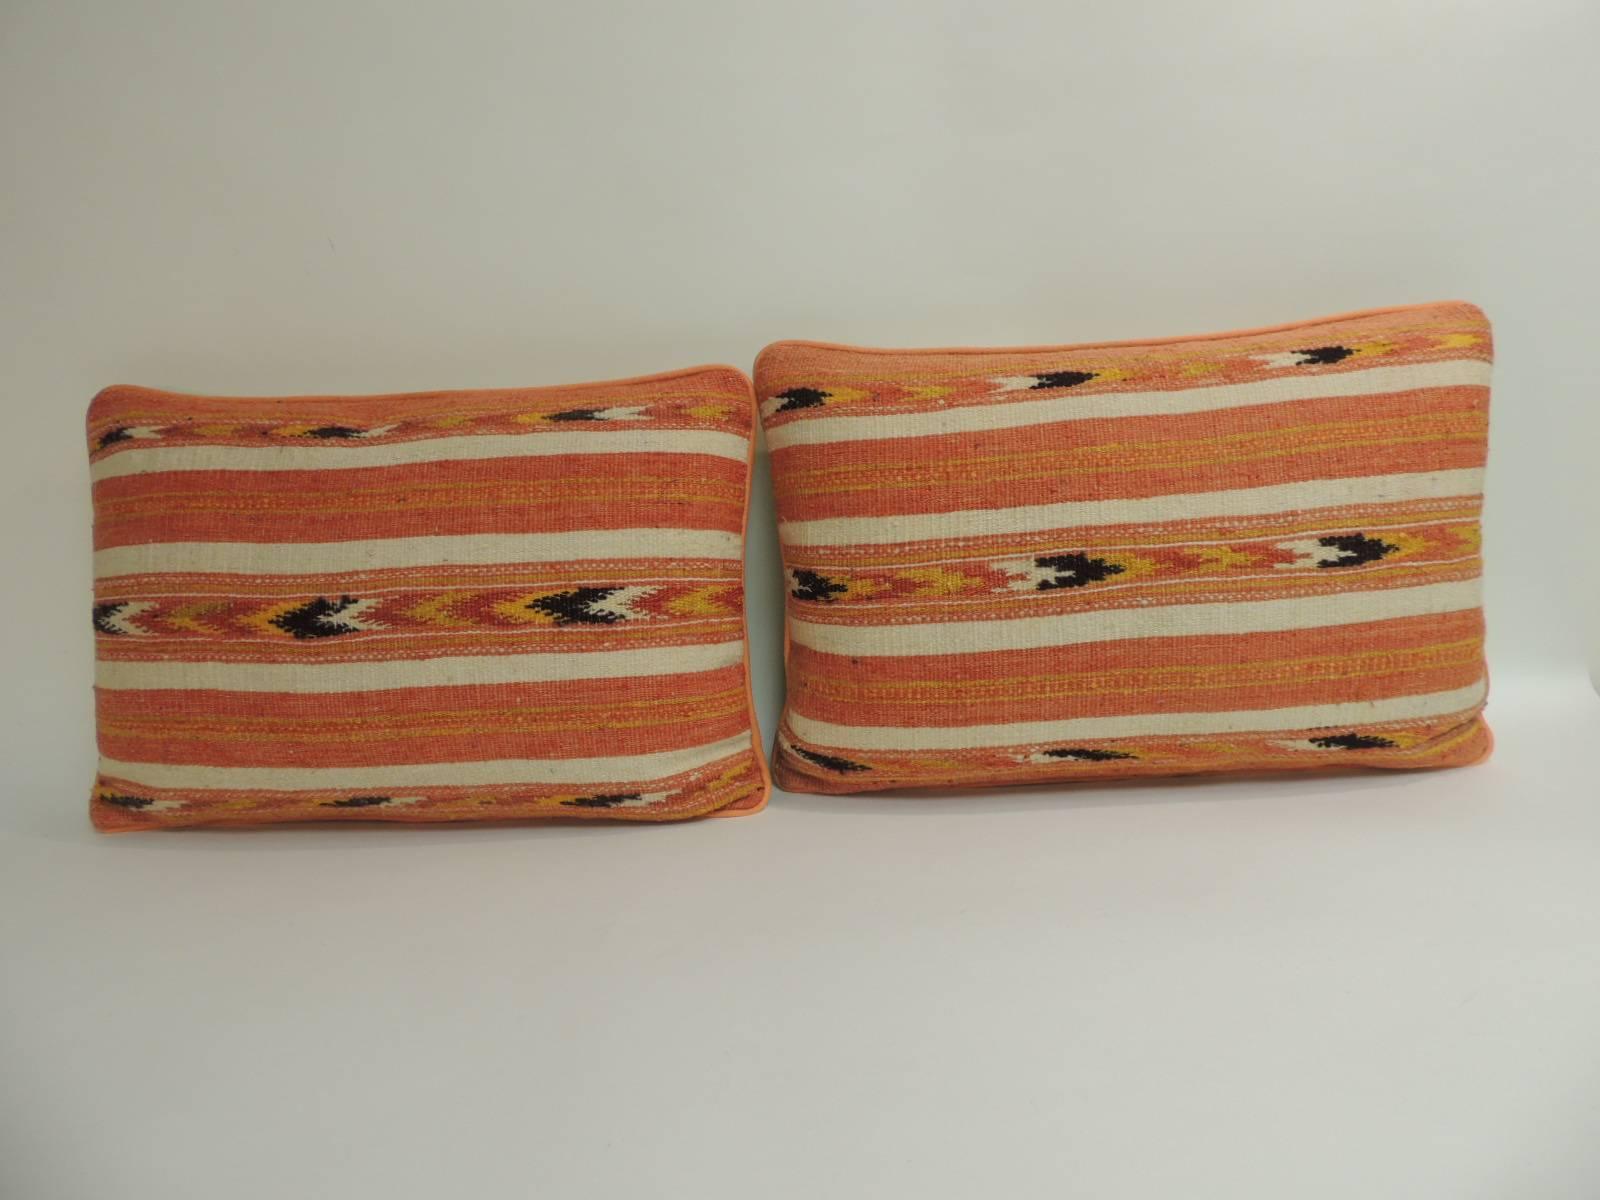 Pair of 19th Century Orange and Yellow Turkish Woven Lumbar Decorative Pillows with yellow textured linen backings and custom ATG welt.  Antique decorative throw pillows hand-made and design in the U.S.A.  Decorative lumbar pillows hand-crafted with